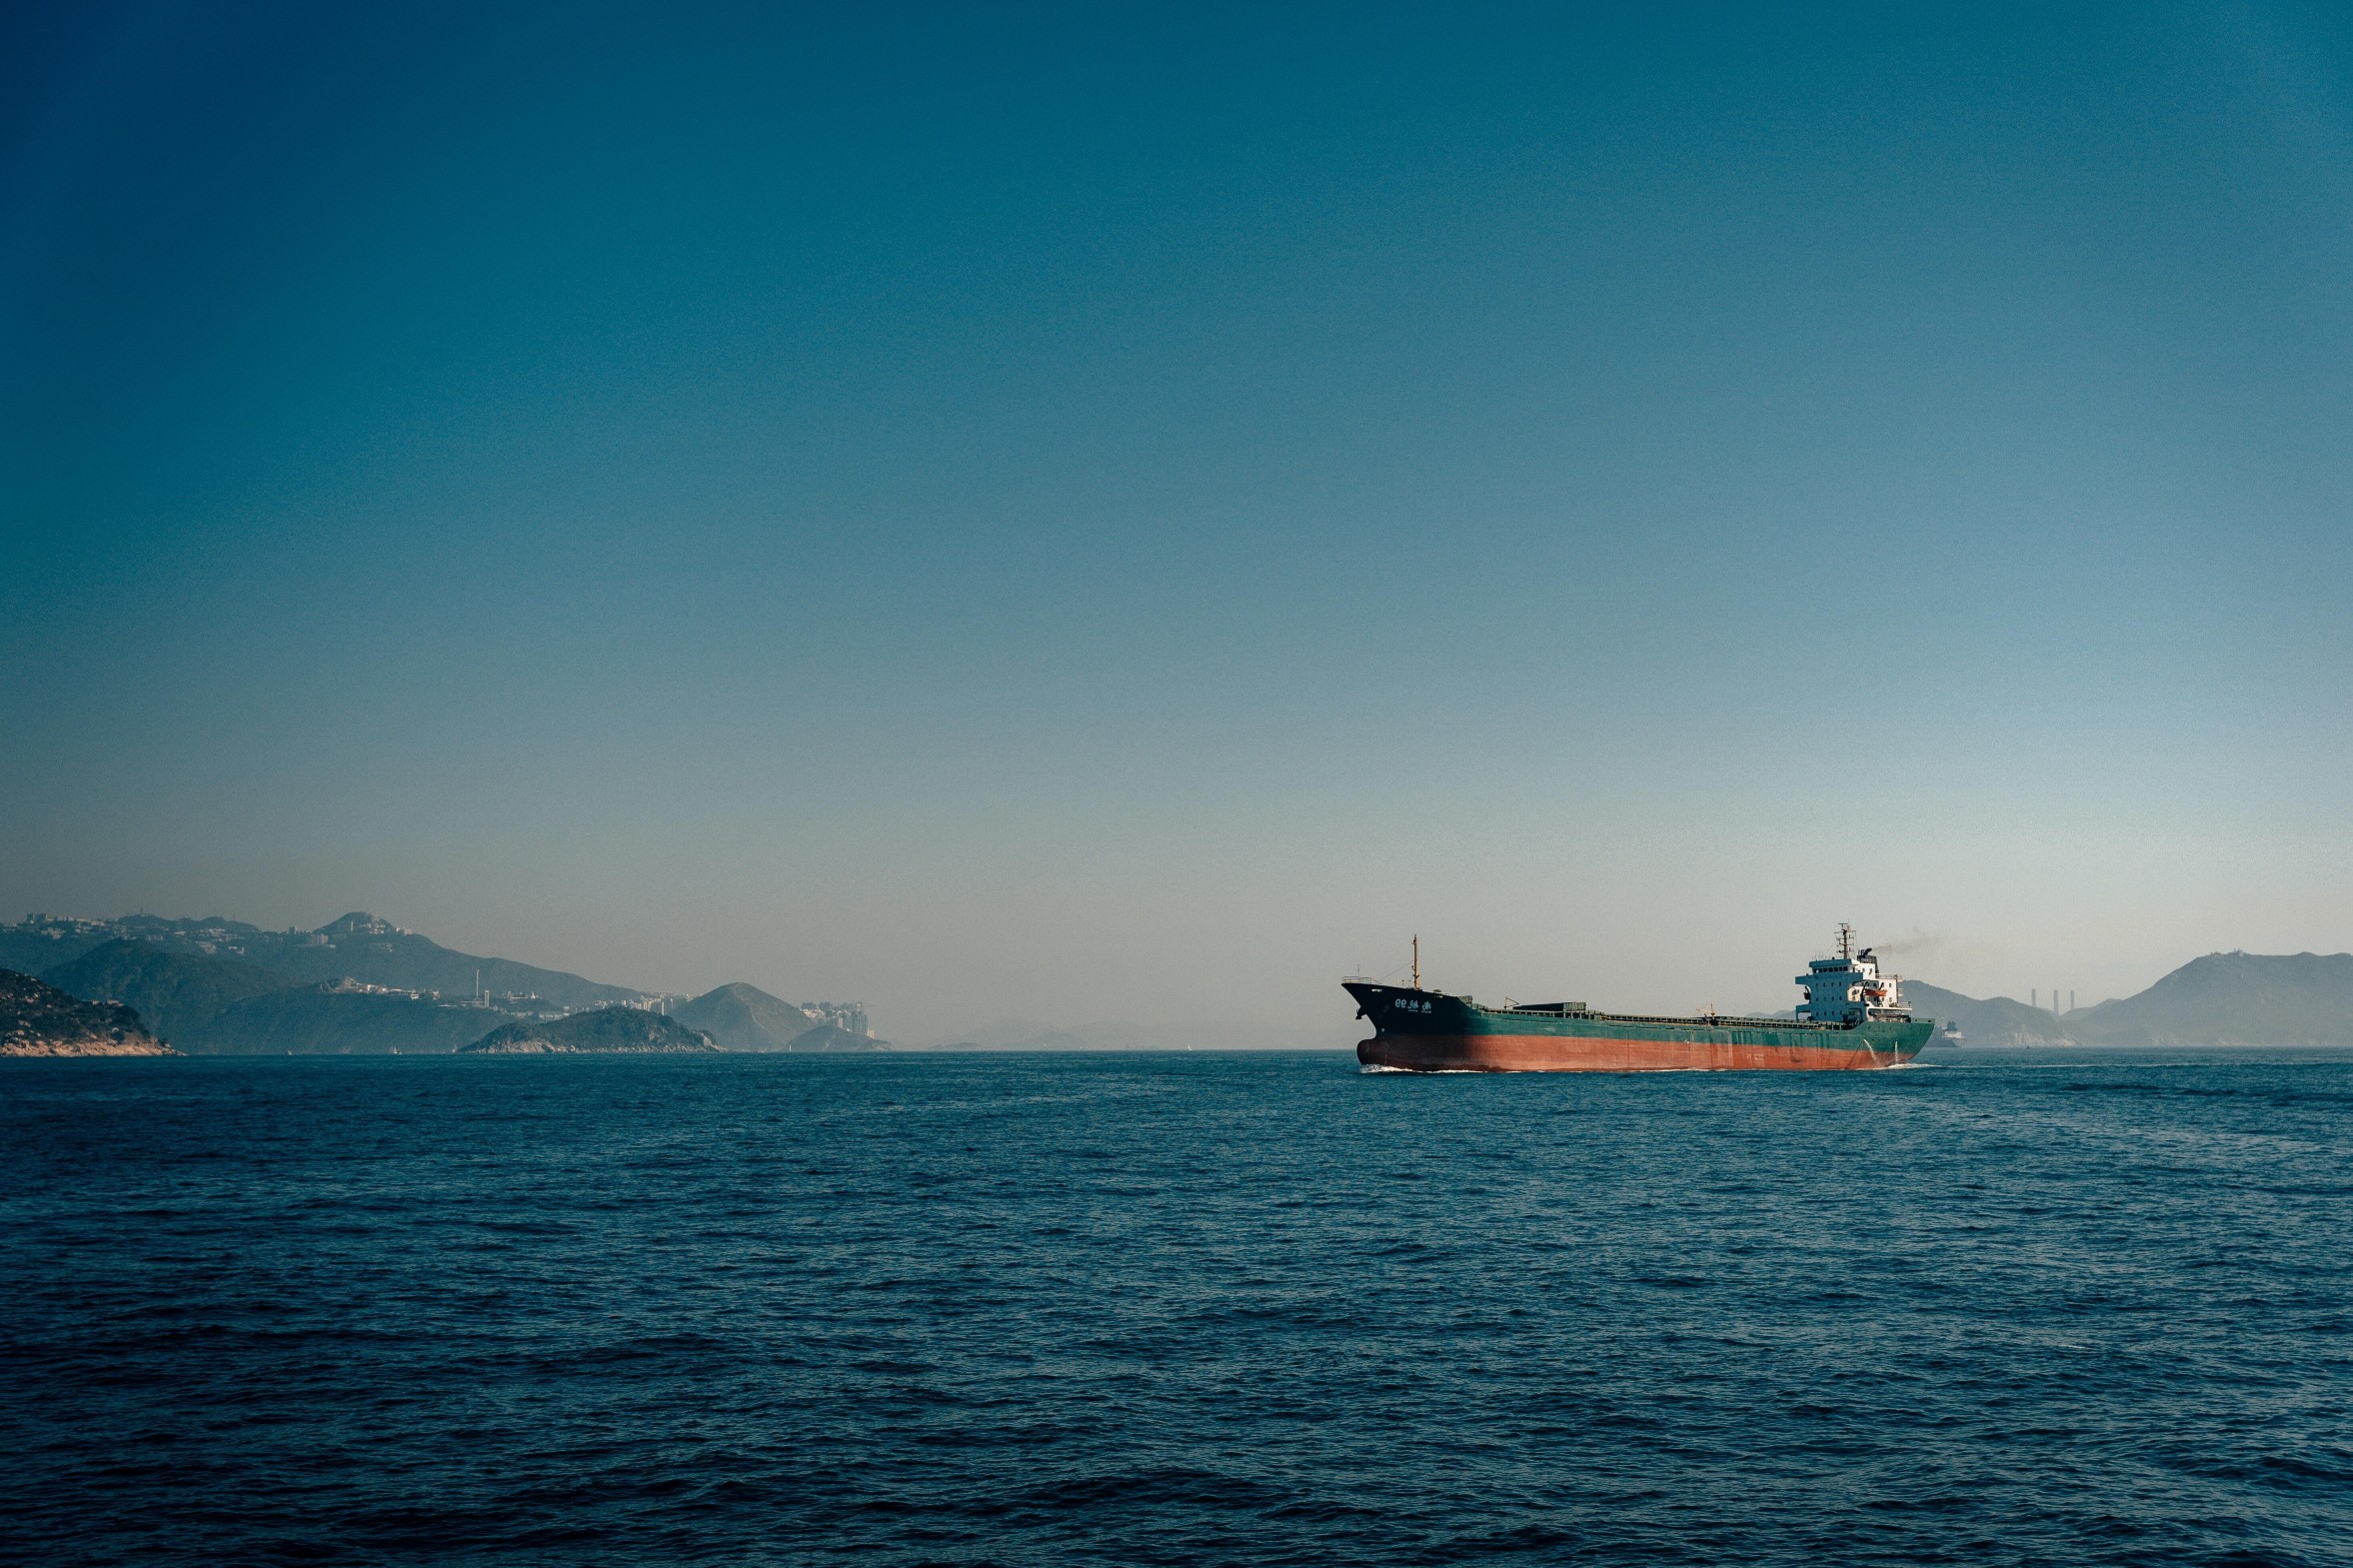 On-Time Means On-Mission: PortXchange's PilotTracker Ensures Seafarer Access to Shore